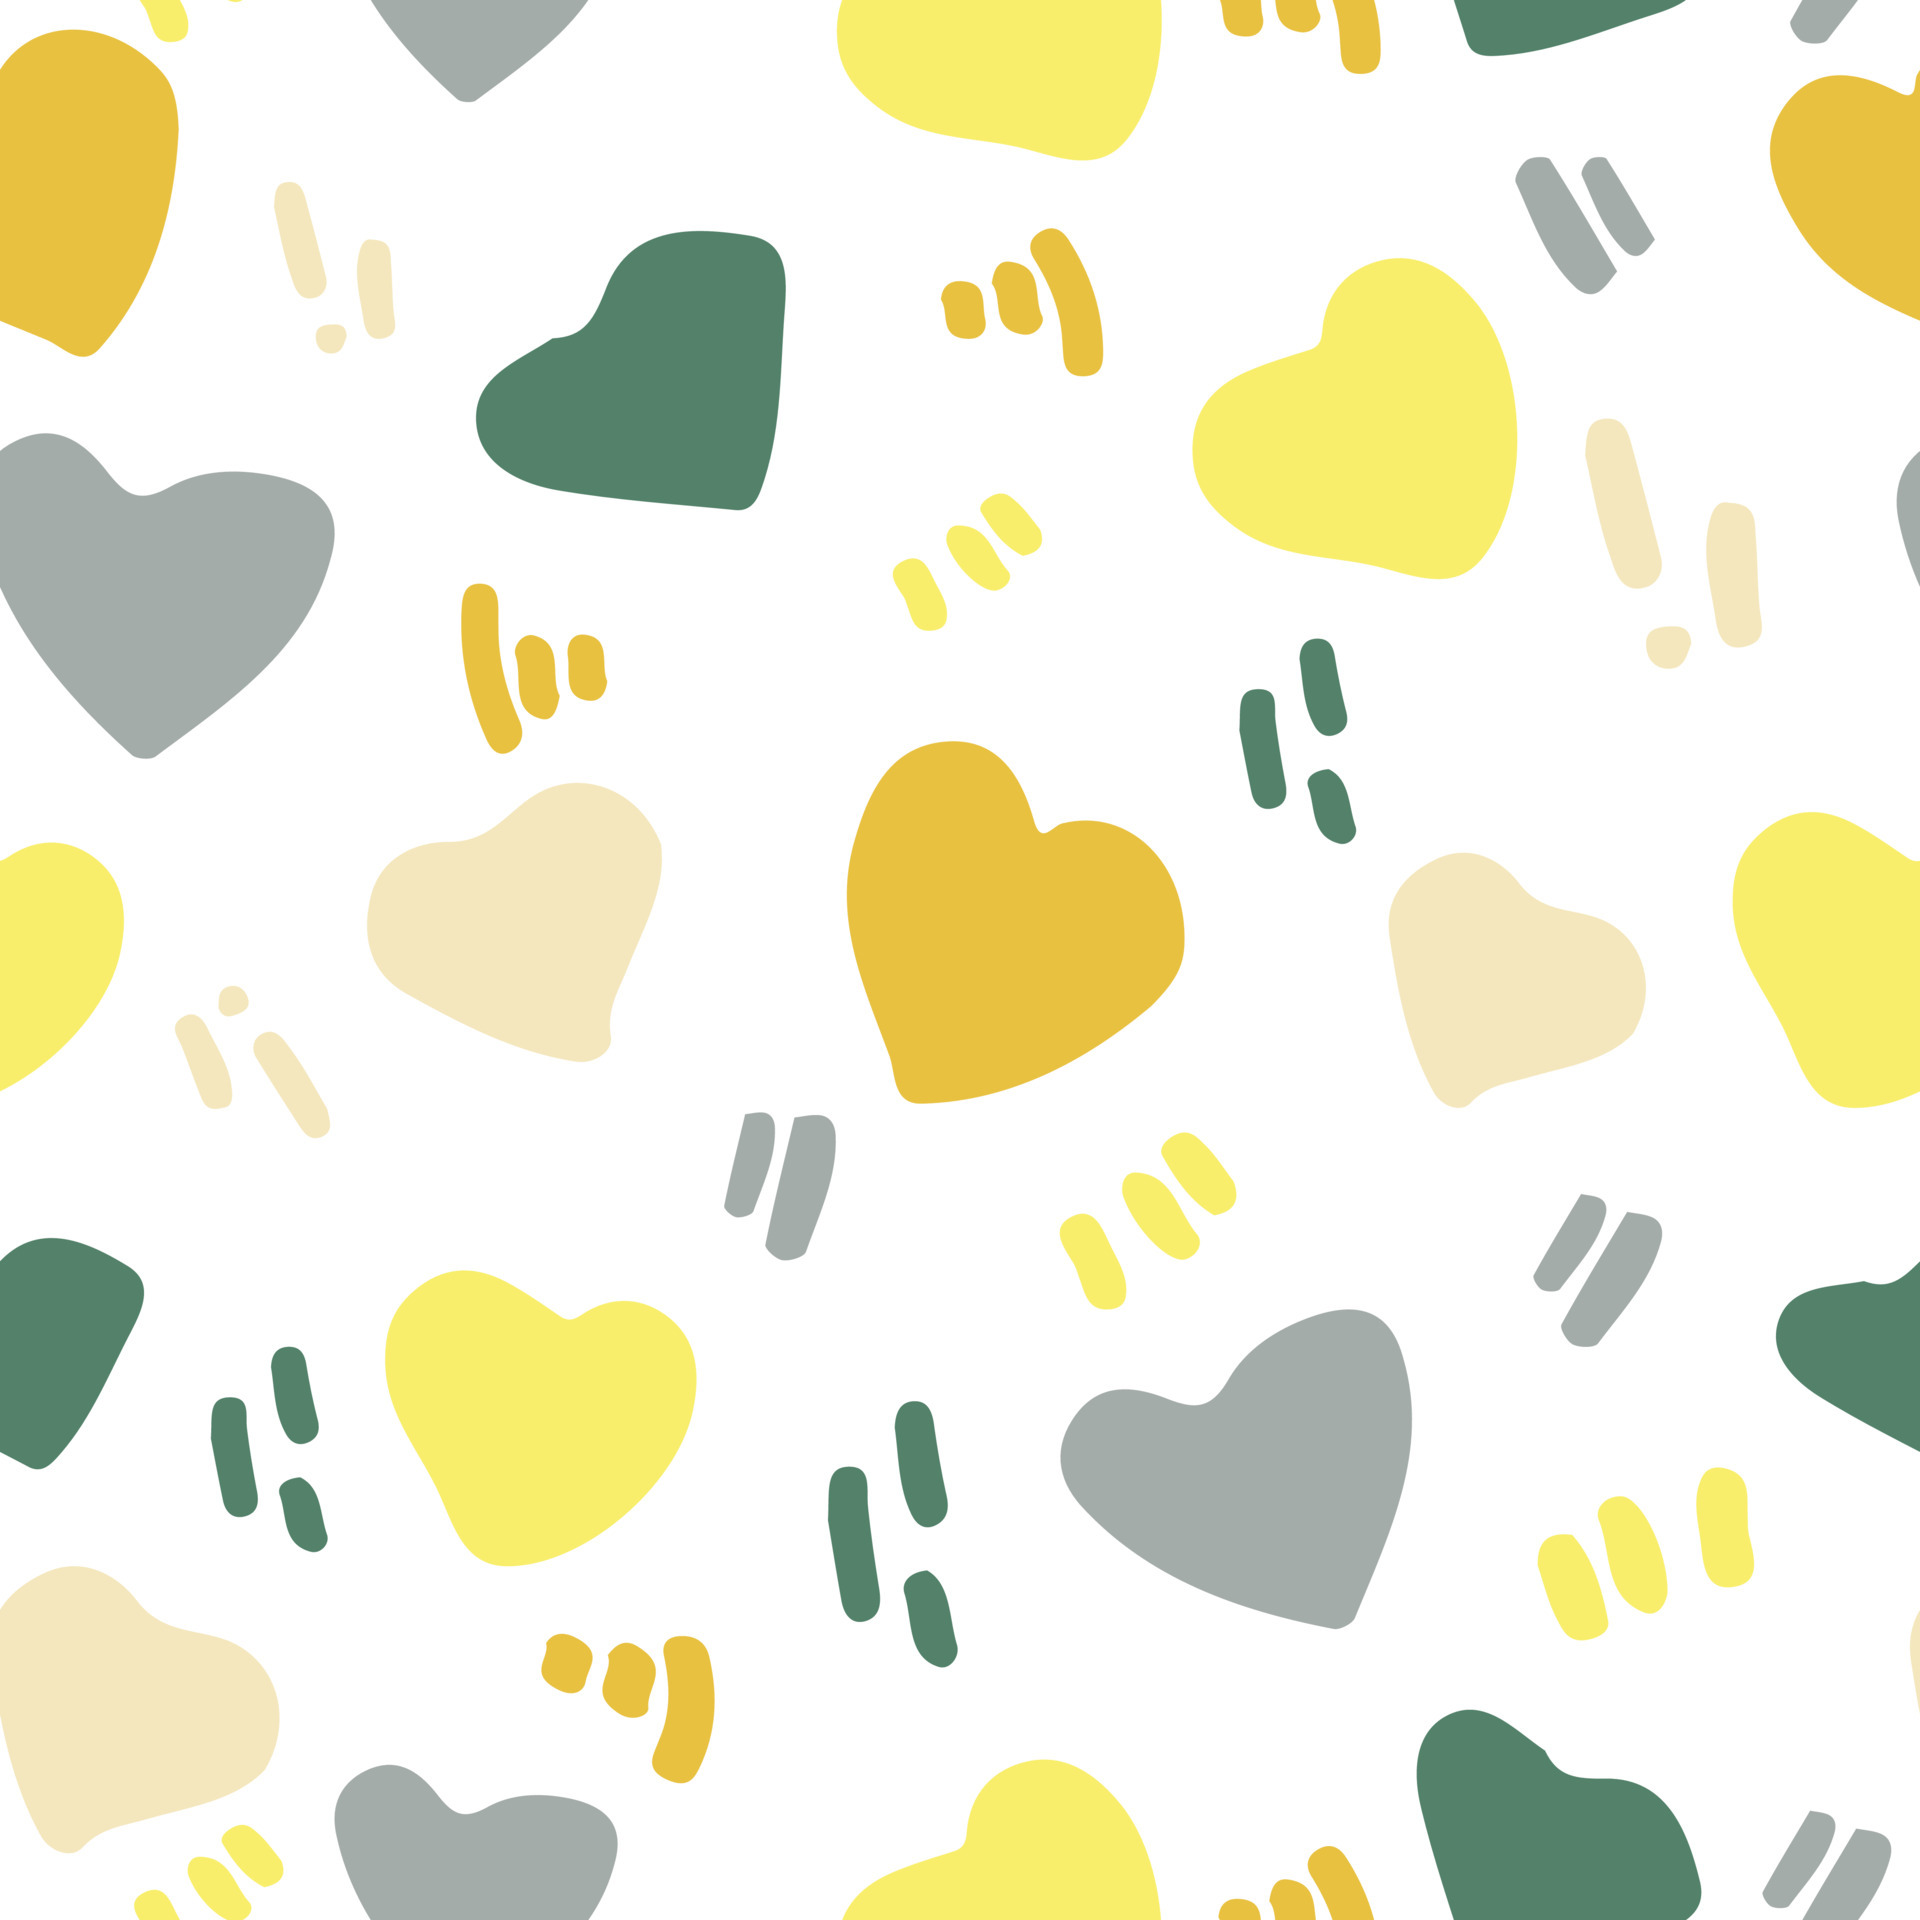 cute hearts and doodle dashes seamless pattern in trending color 2021. hand drawn minimalism simple. wallpaper, textiles, wrapping paper, decor. gray, gold, yellow, green. love, valentines day